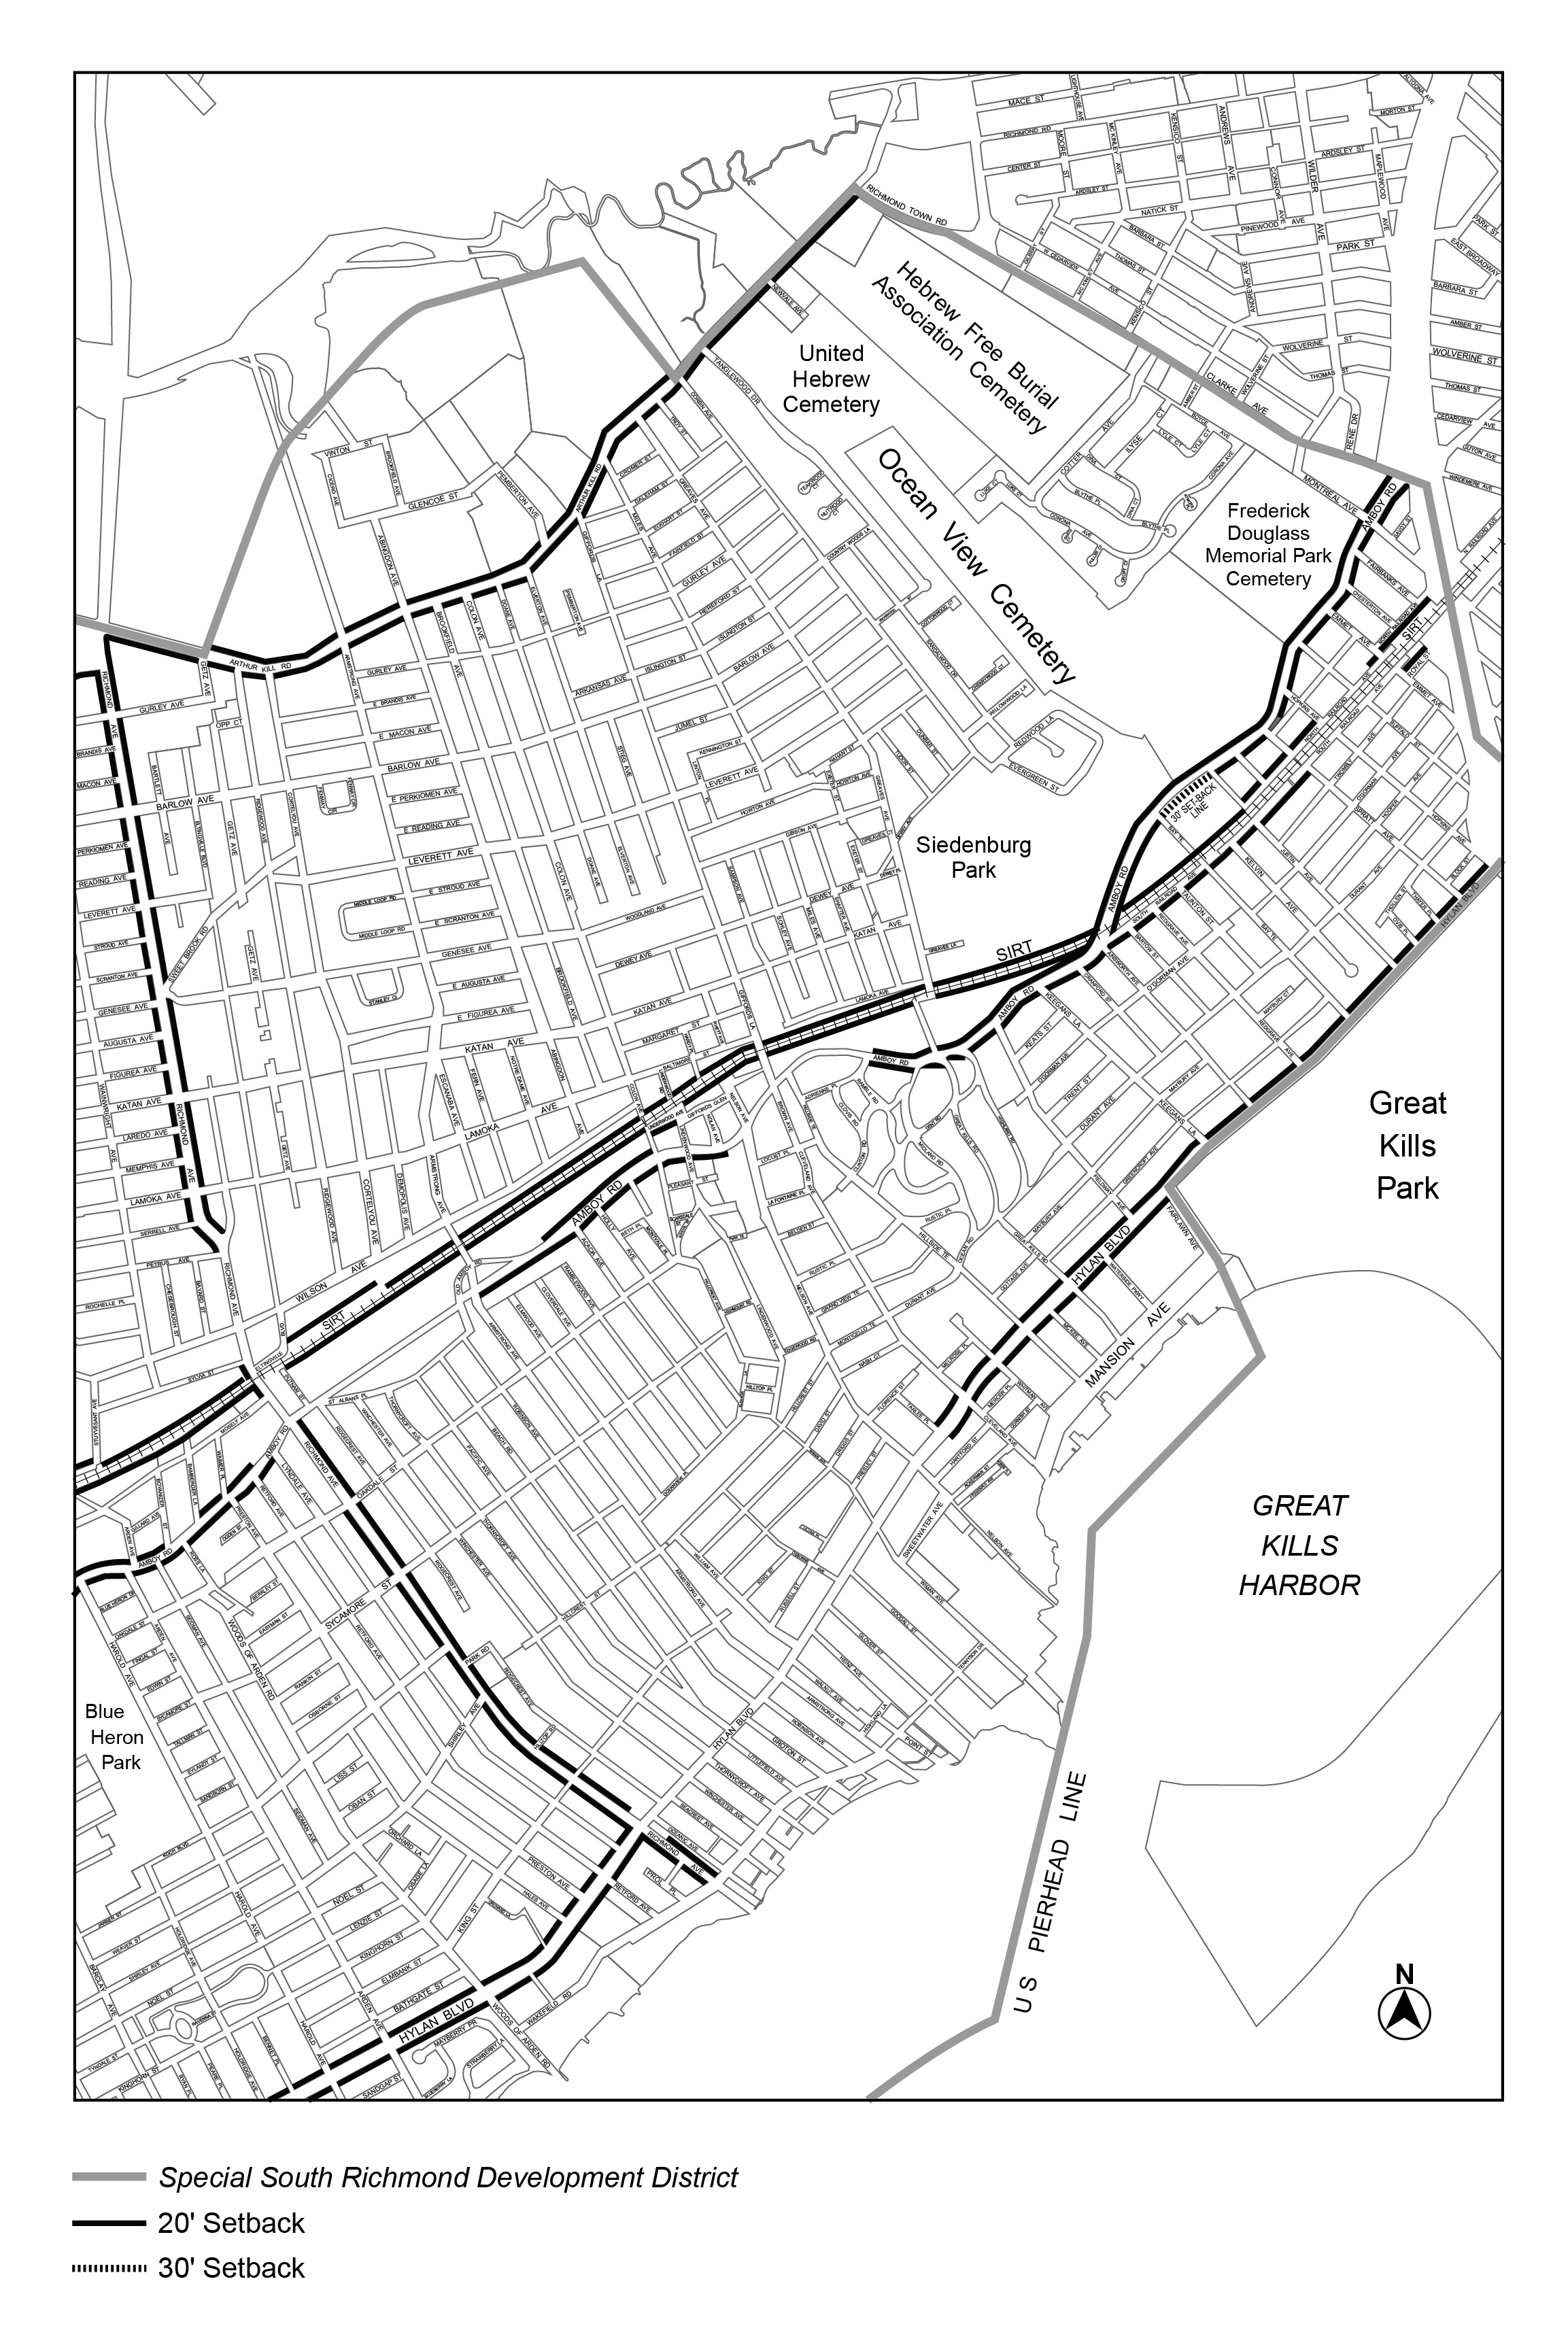 Article X, Chapter 7, Appendix A, Map 2.4 amended per N 230112 ZRR (South Richmond Zoning Relief) adopted by City Council 11/2/23